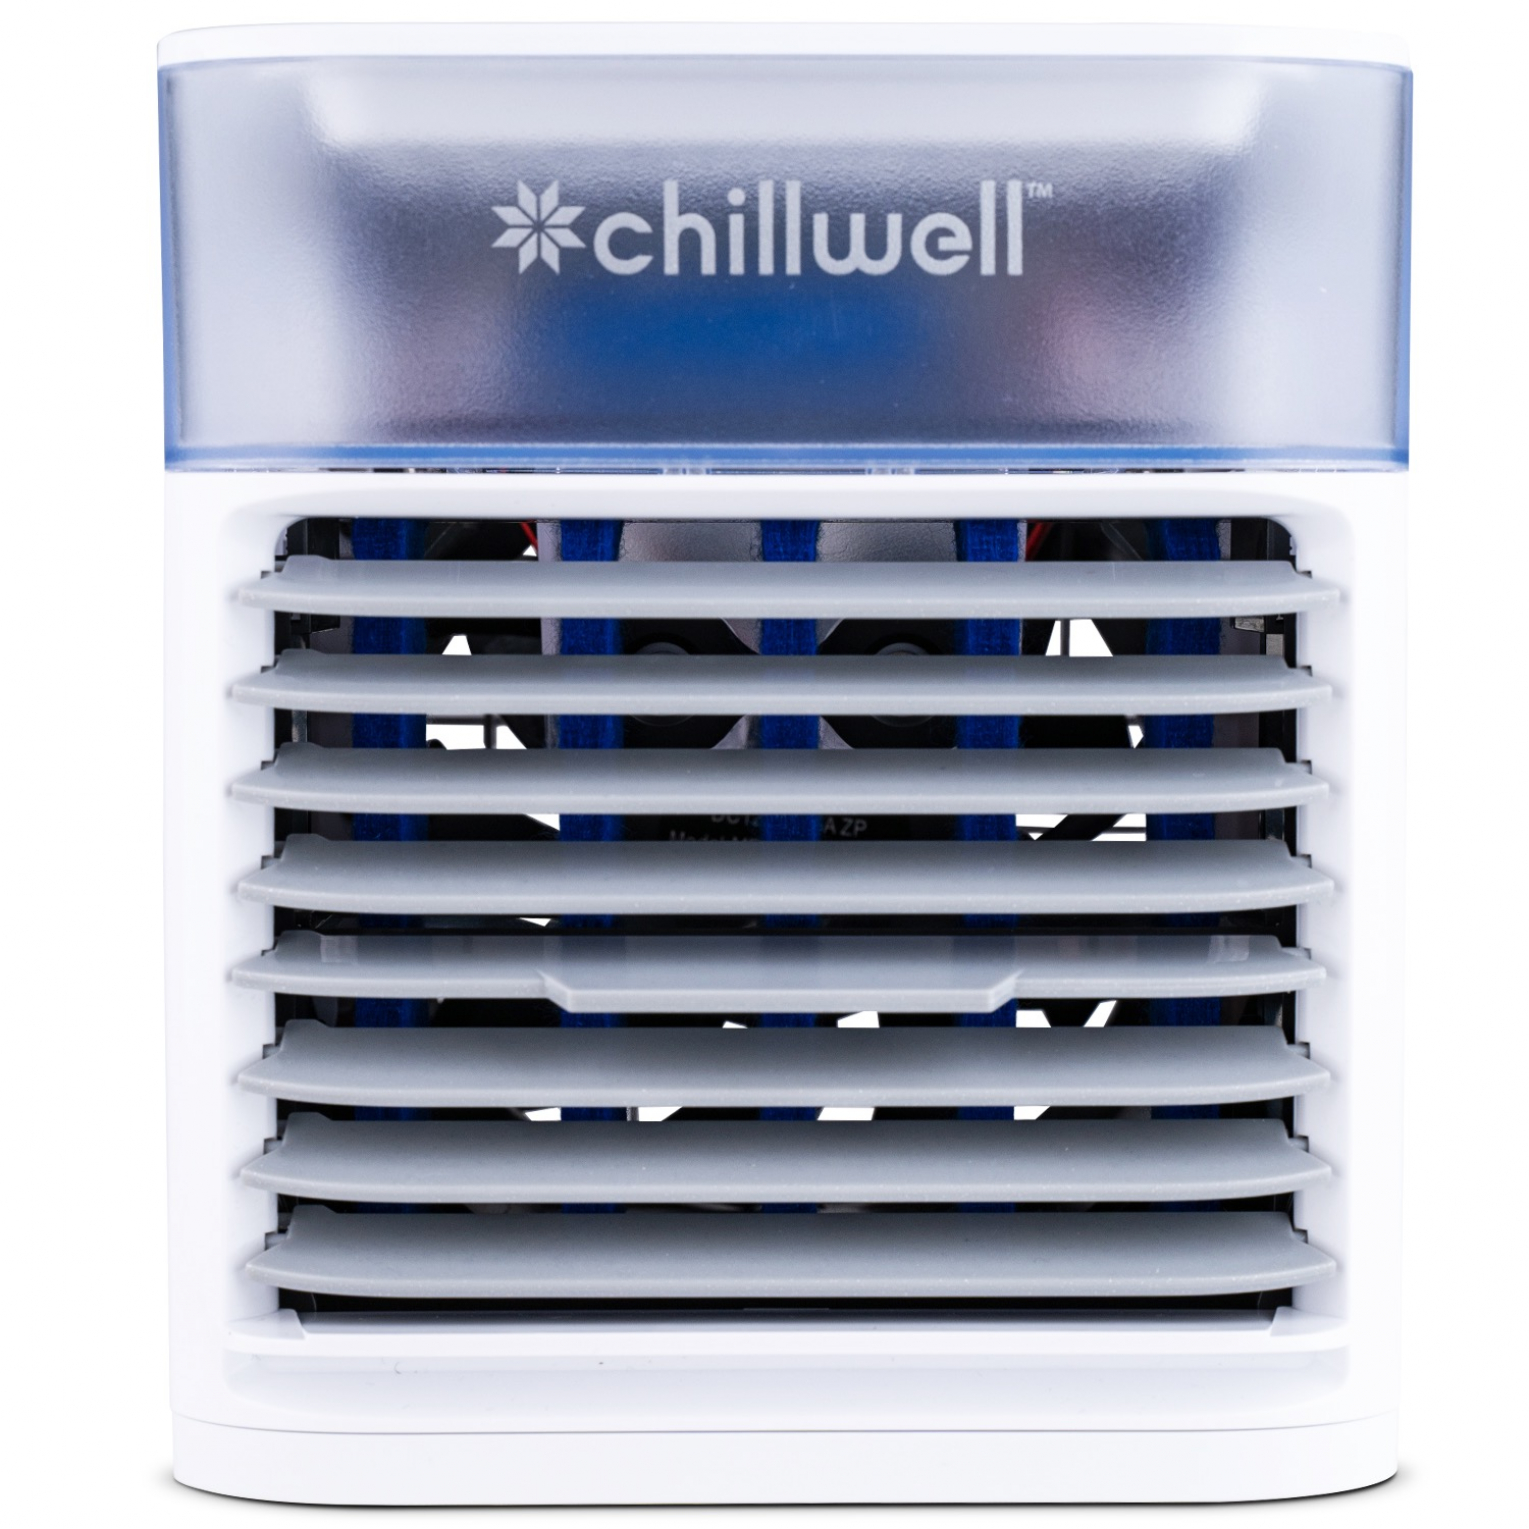 Chillwell AC Air Cooler Review